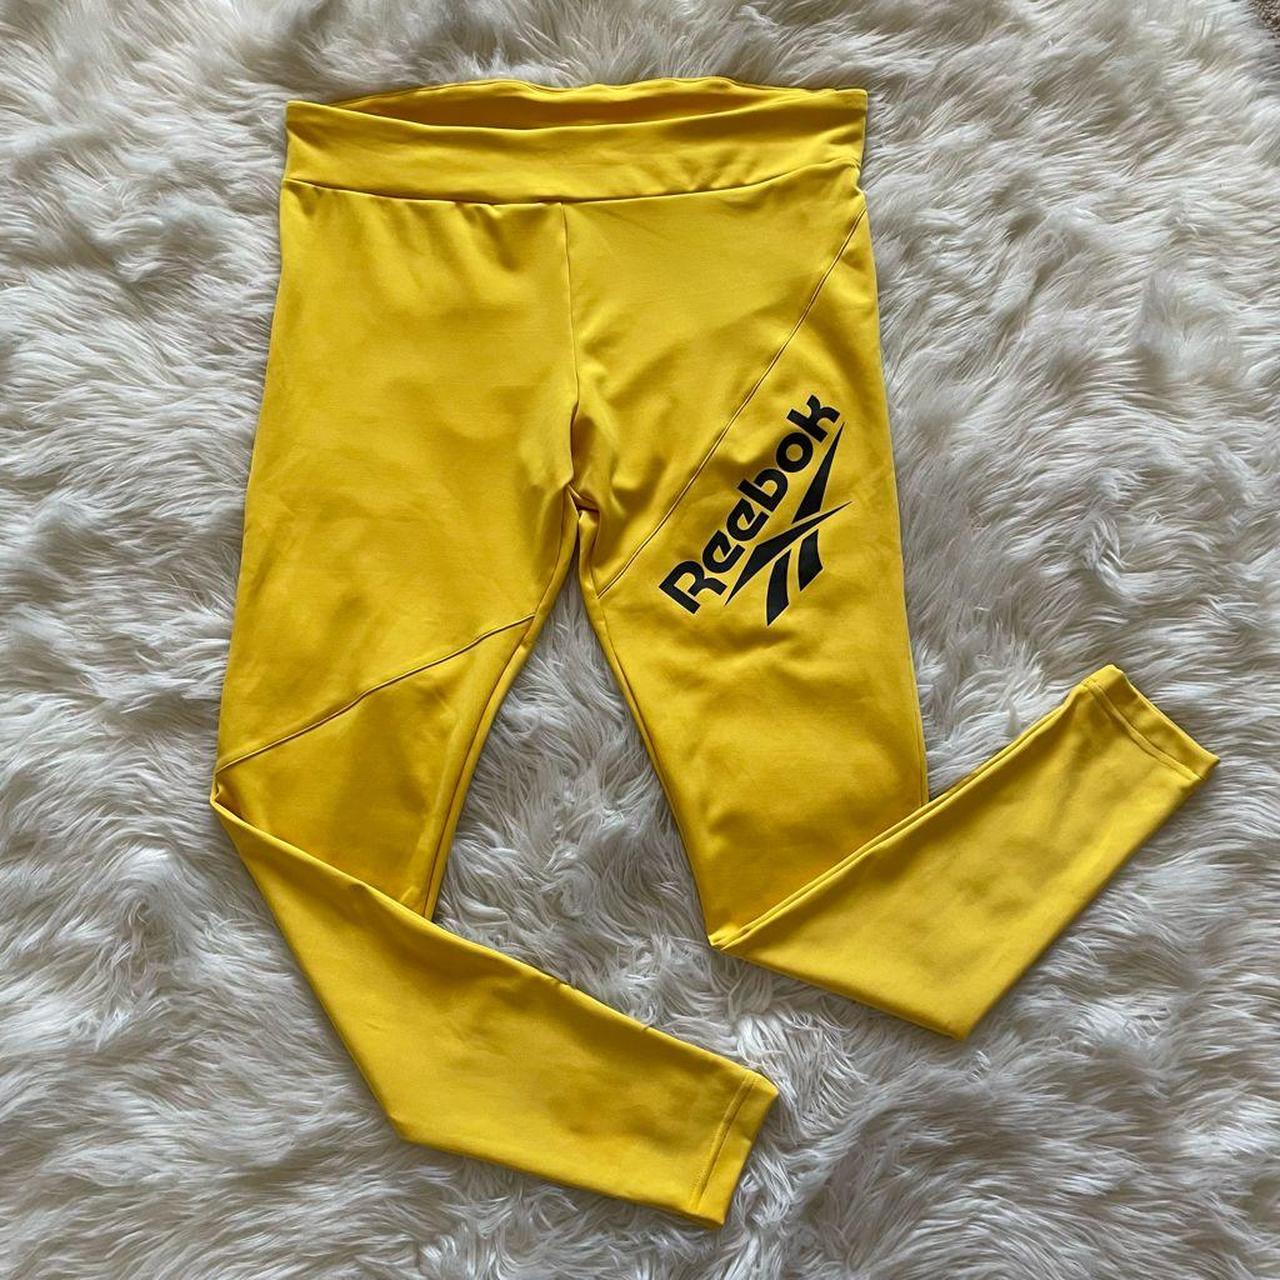 Reebok Classic Vector Leggings from the Lost & Found - Depop